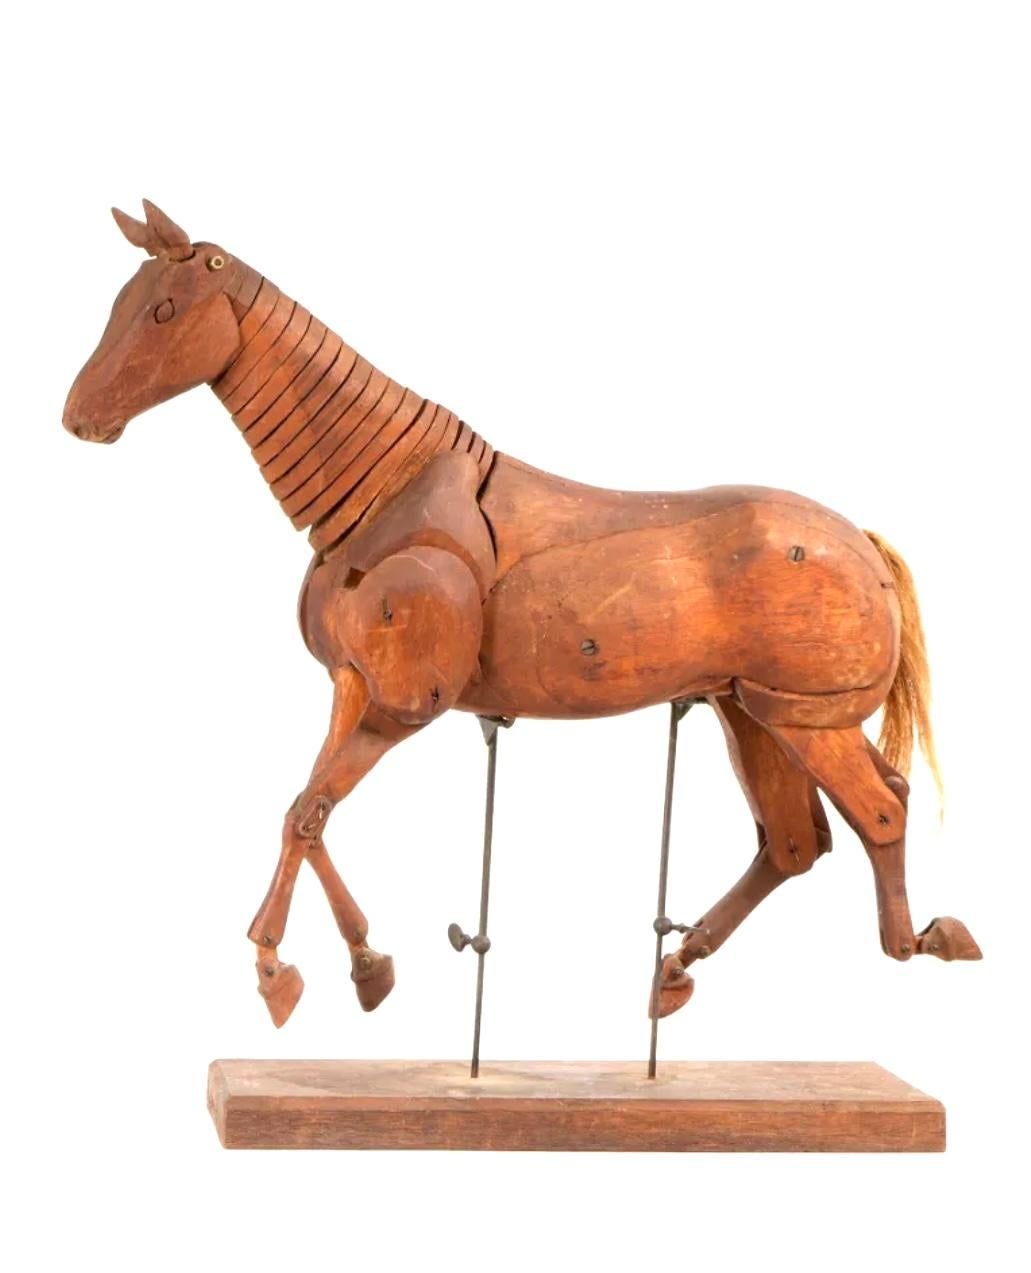 20th Century Fully Articulated Artist's Model Of Horse, Signed